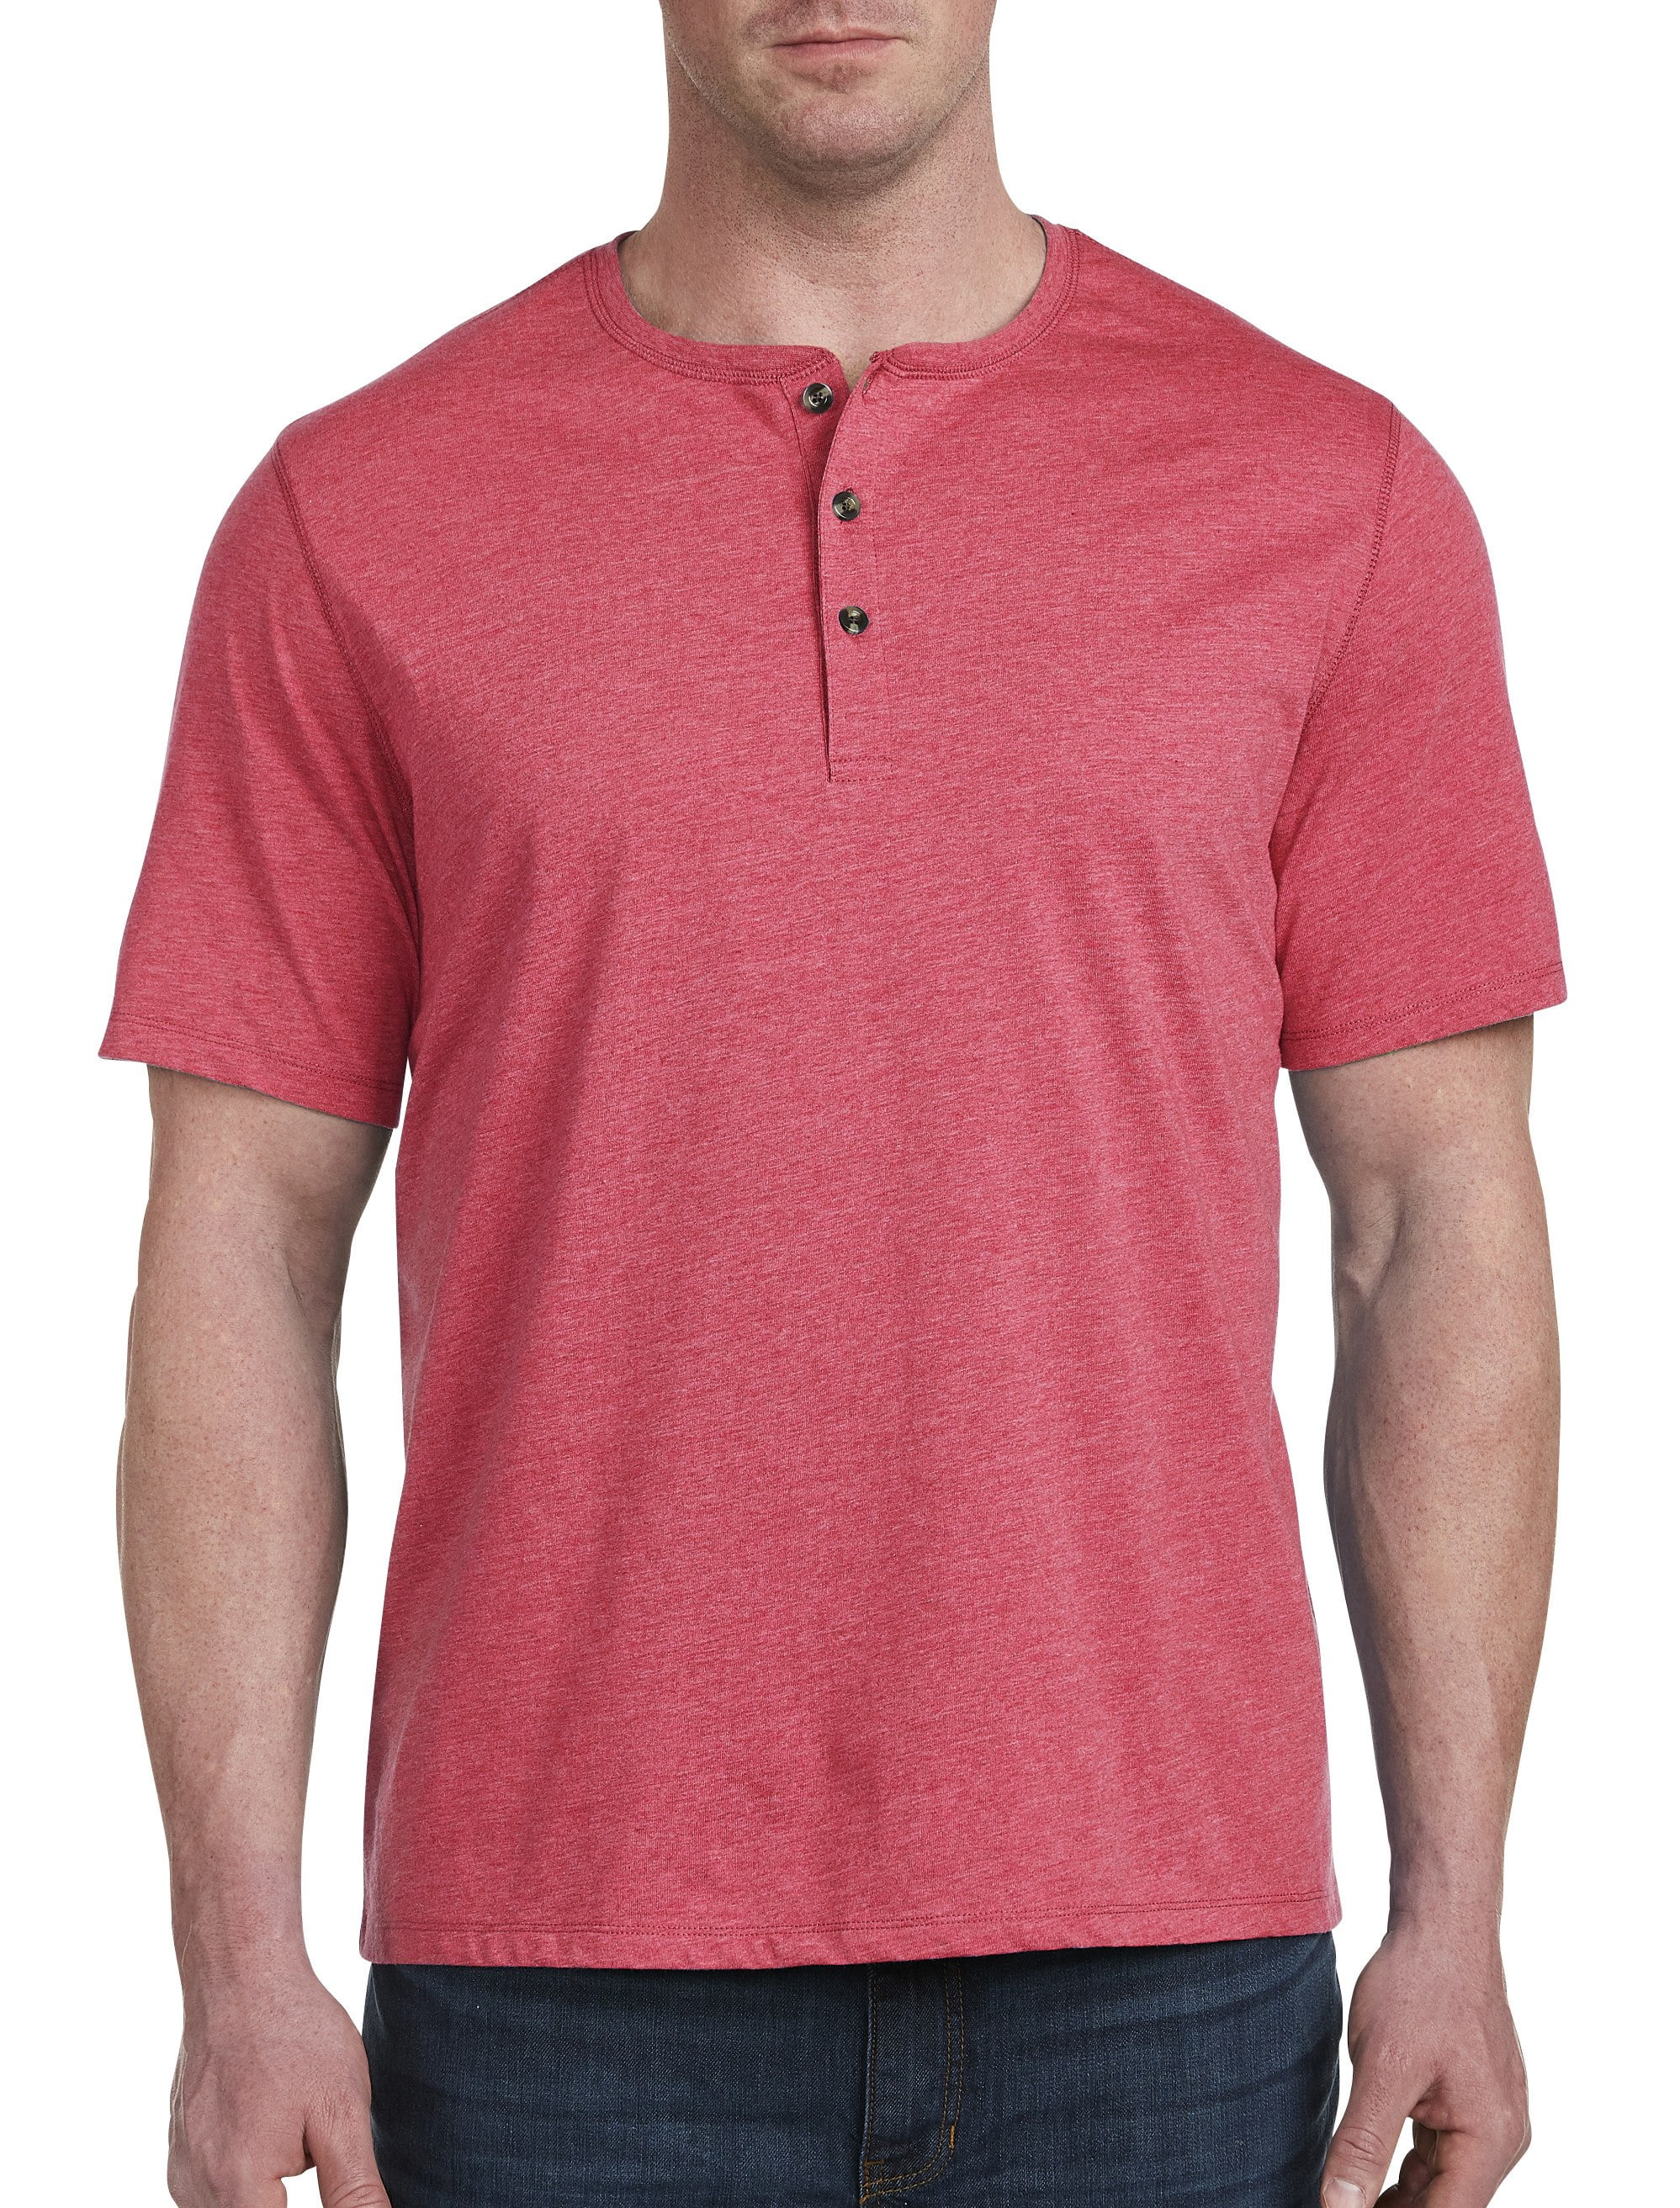 Harbor Bay by DXL Big and Tall Moisture-Wicking Polo Shirt Flagship ...